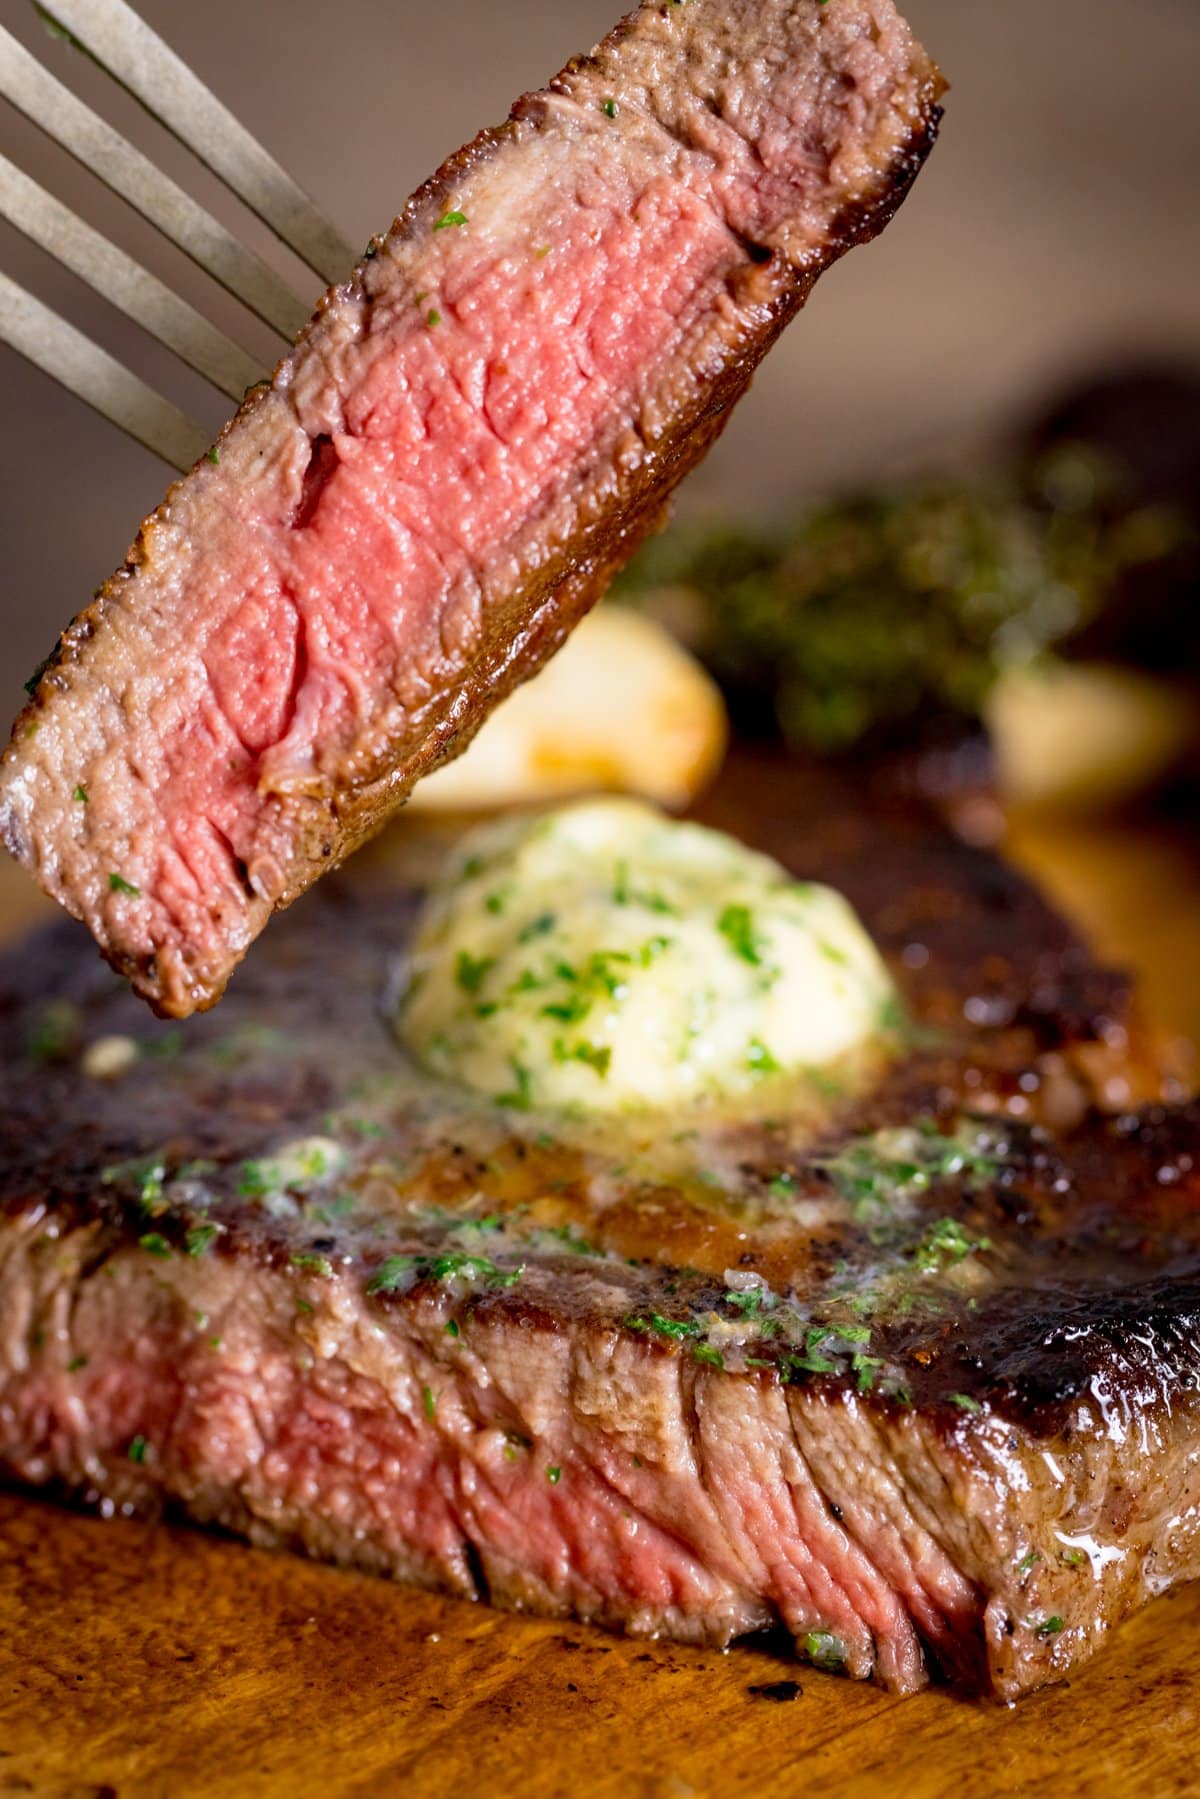 Cooked steak on a wooden board, topped with garlic butter. A slice has been taken from the steak and is being lifted by a fork